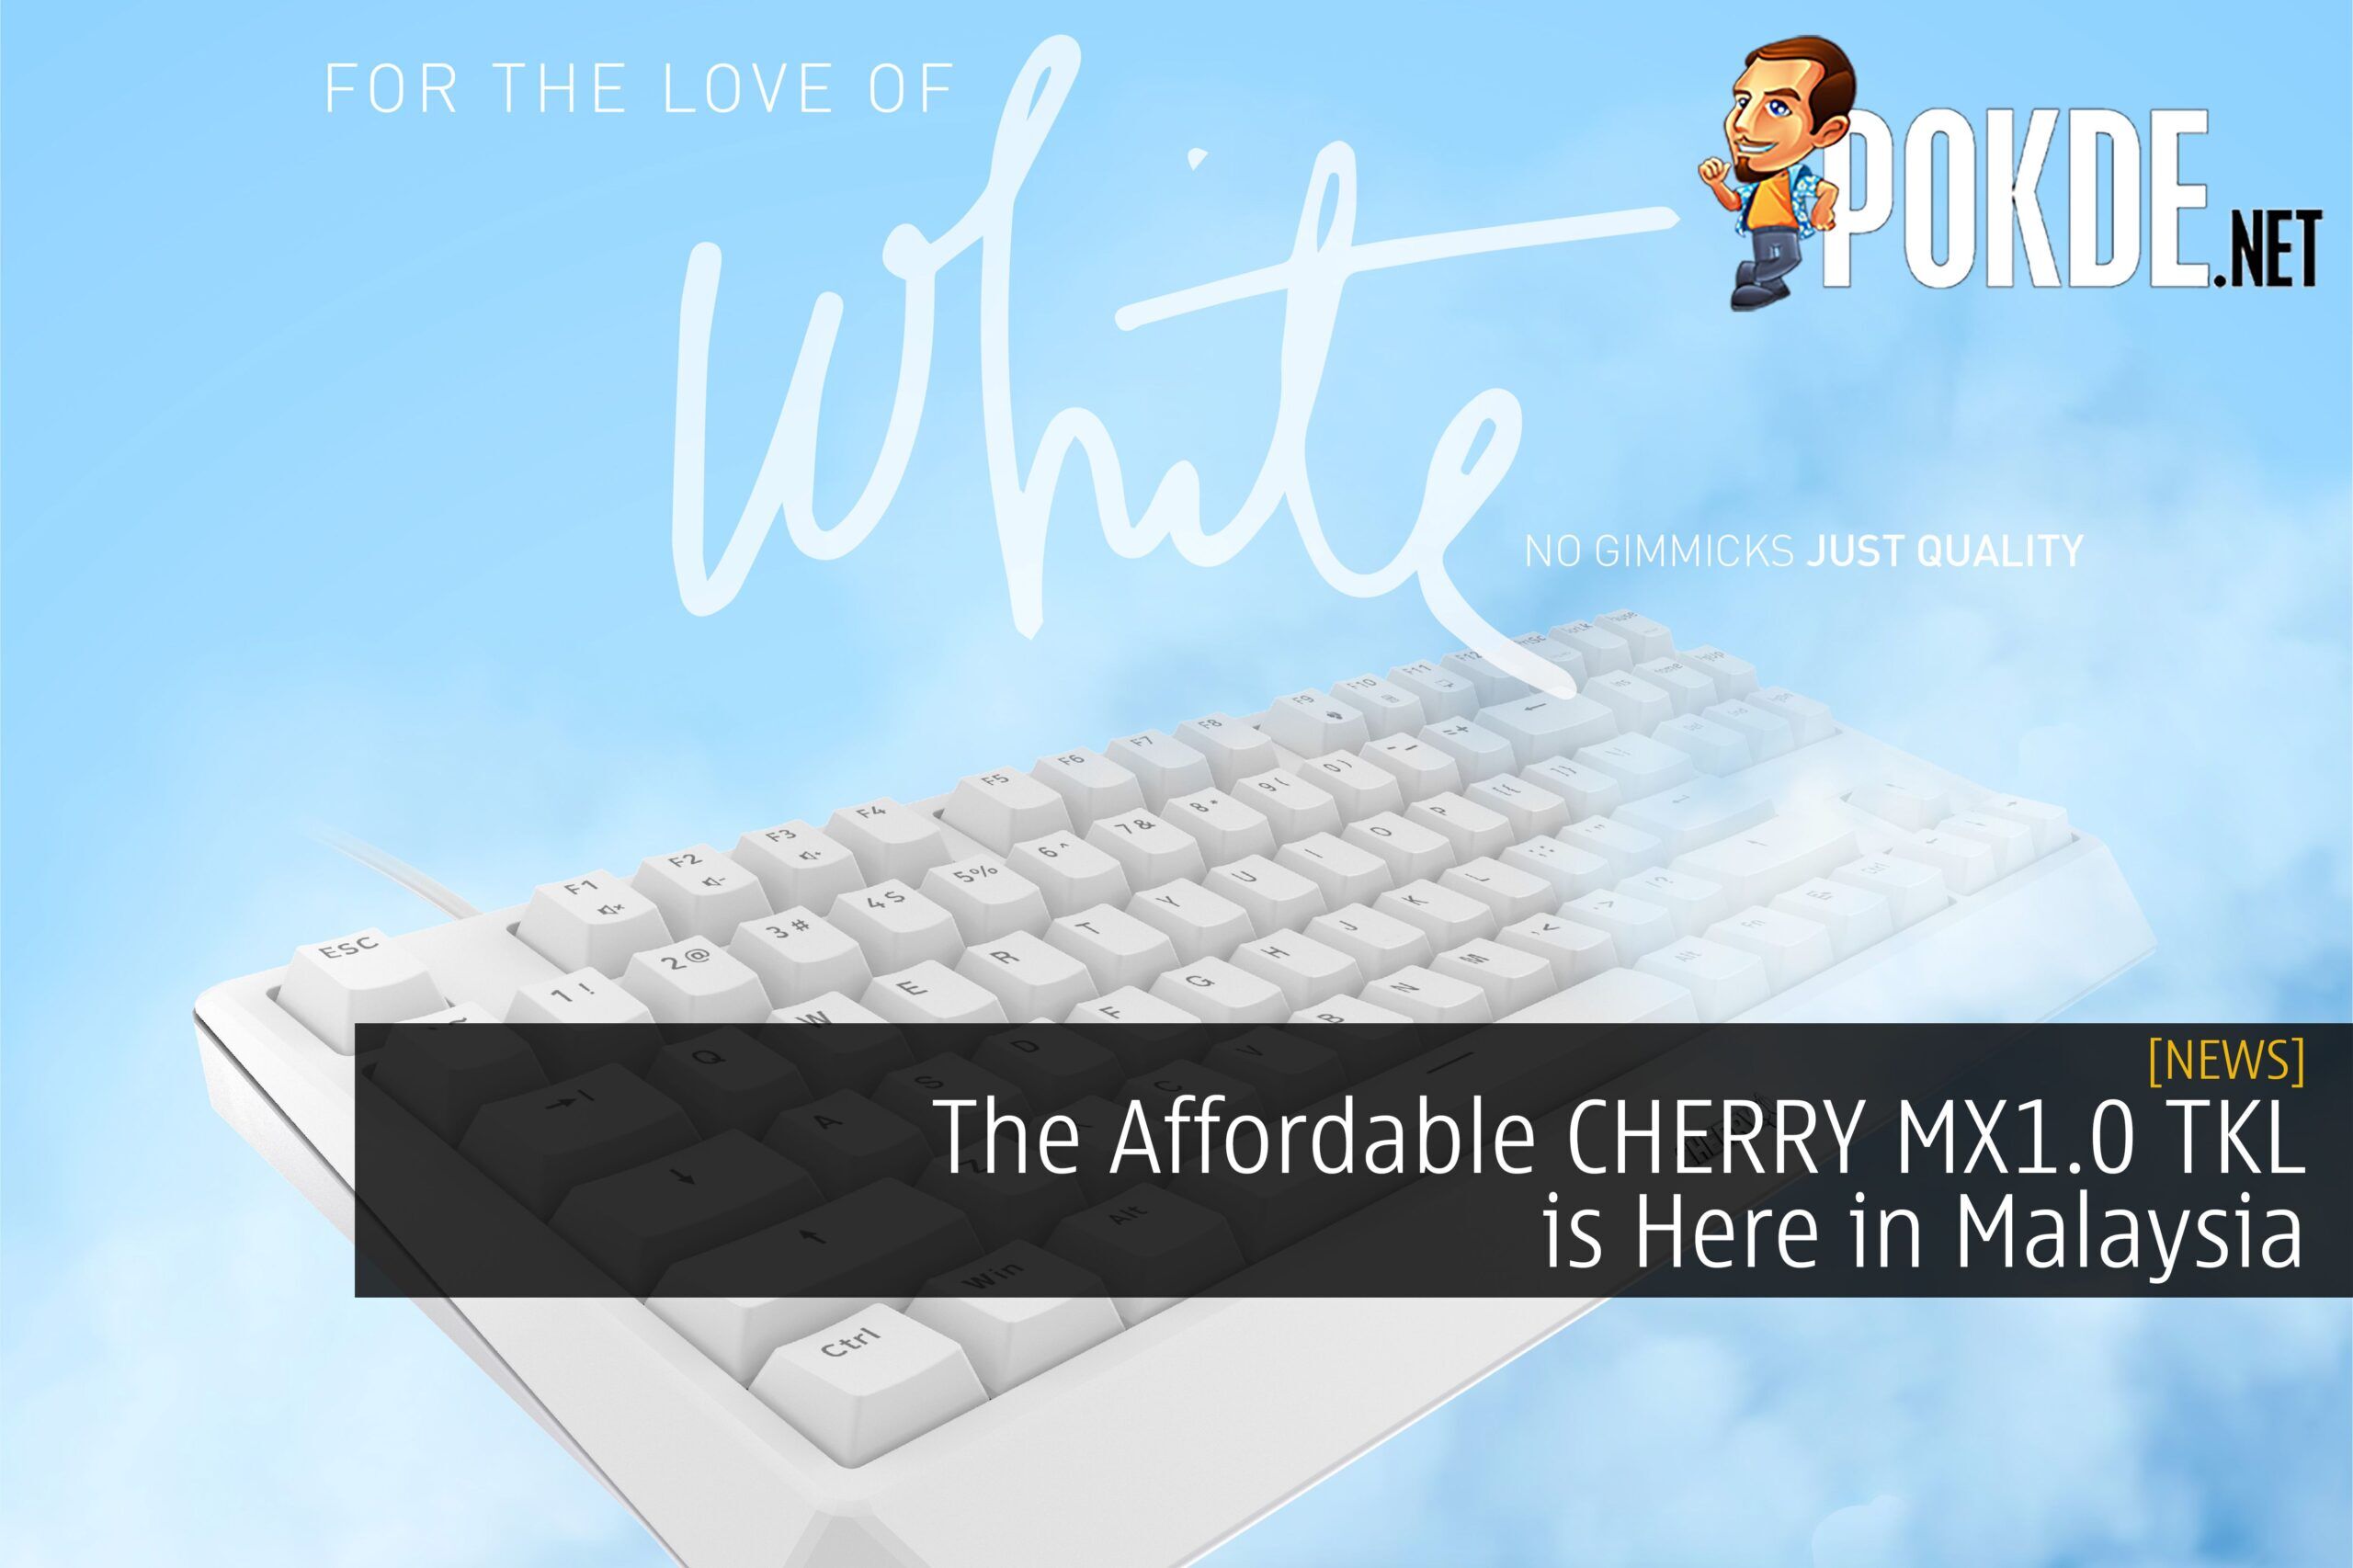 The Affordable CHERRY MX1.0 TKL is Here in Malaysia